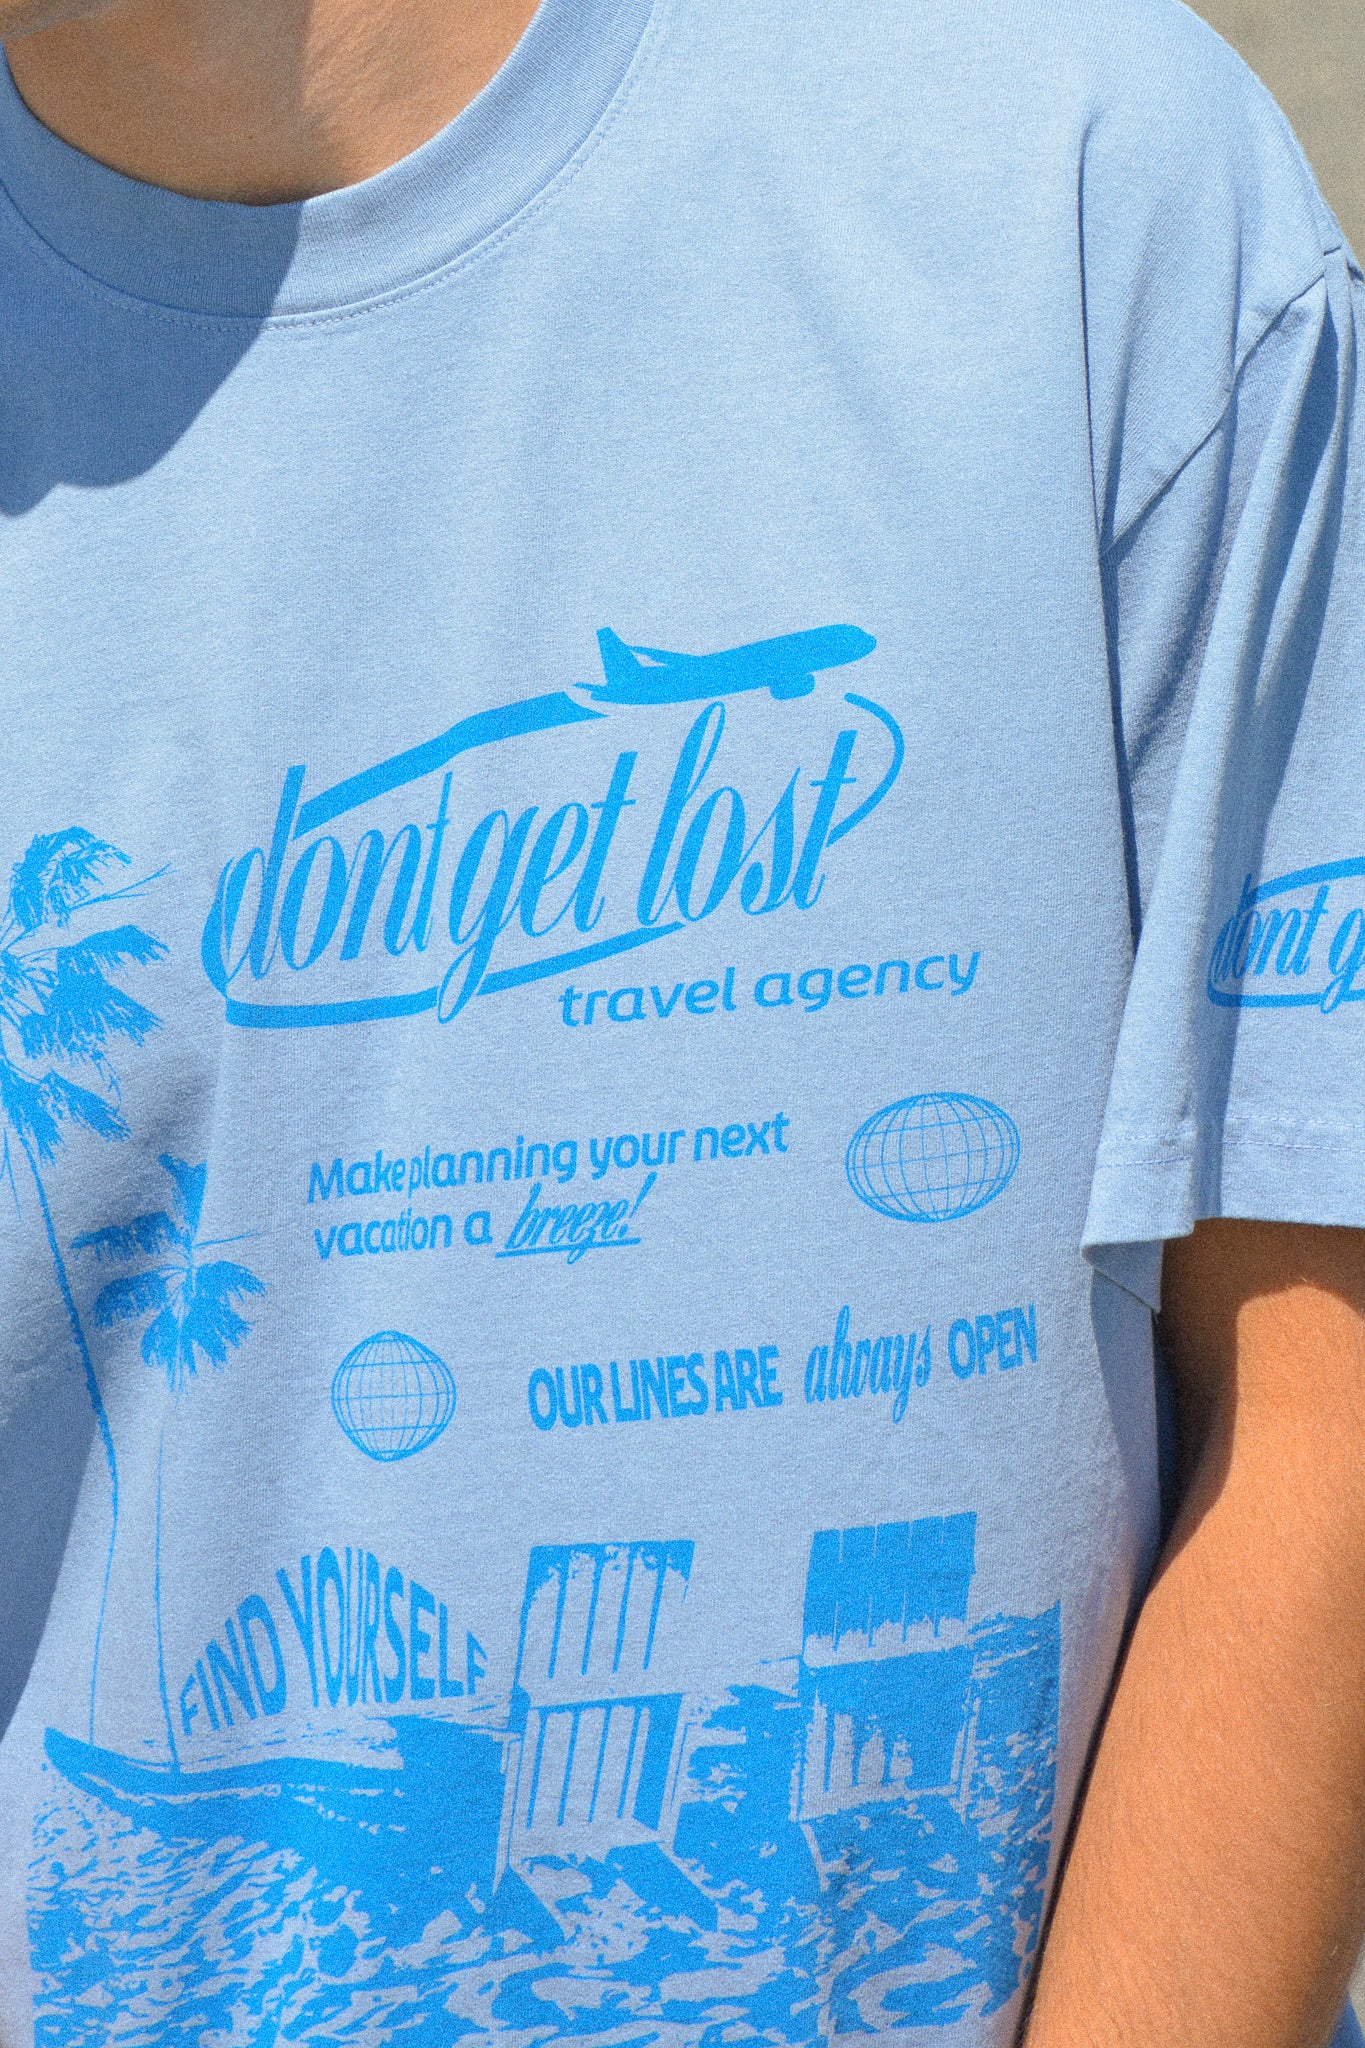 Don't Get Lost Travel Agency Tee